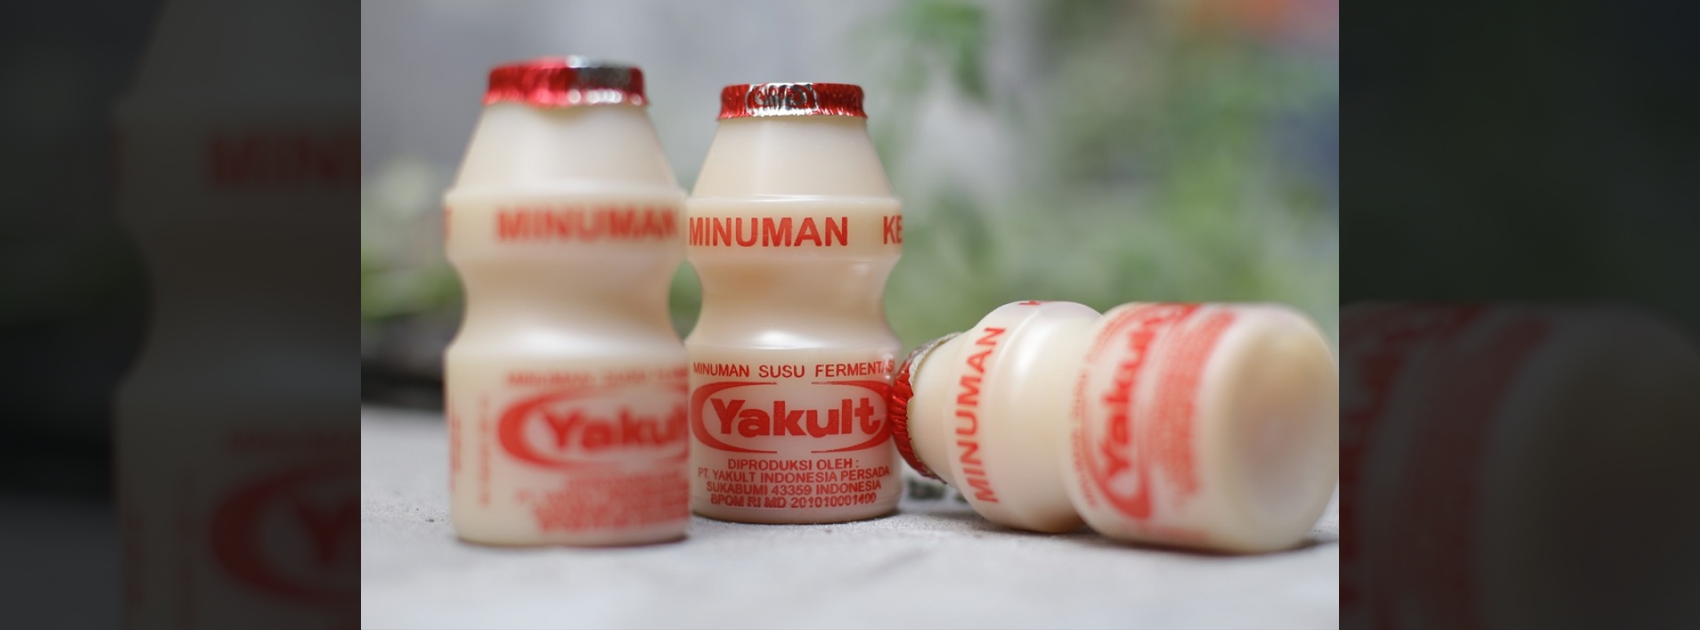 Yakult Unknown Facts,Inspiring Facts about Yakult, Interesting Facts 2019, Yakult Amazing Facts, Yakult Facts, Yakult Facts 2019, Yakult History and Facts,Yakult Lesser Known Facts, Yakult Success Story,Most Interesting Facts, startup stories, Surprising Facts About Yakult